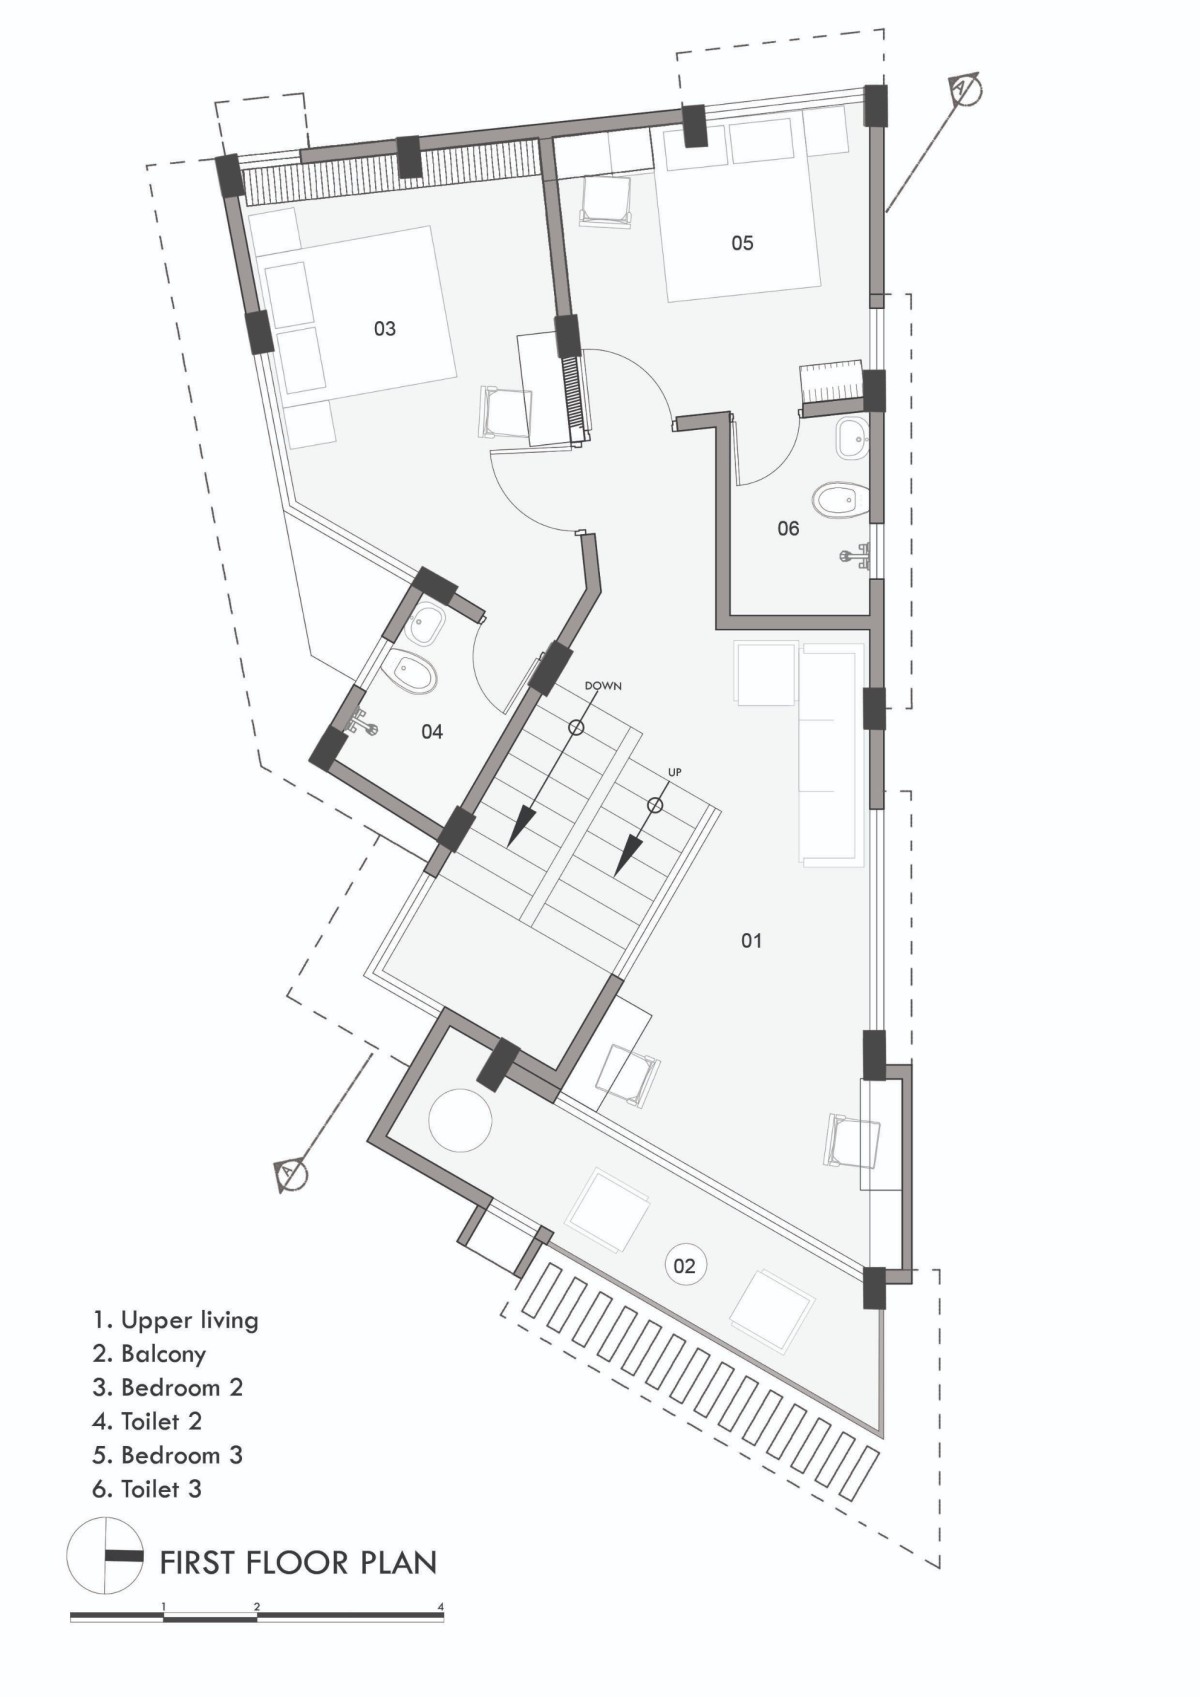 First floor plan of The N’Arrow House by Designloom Architects